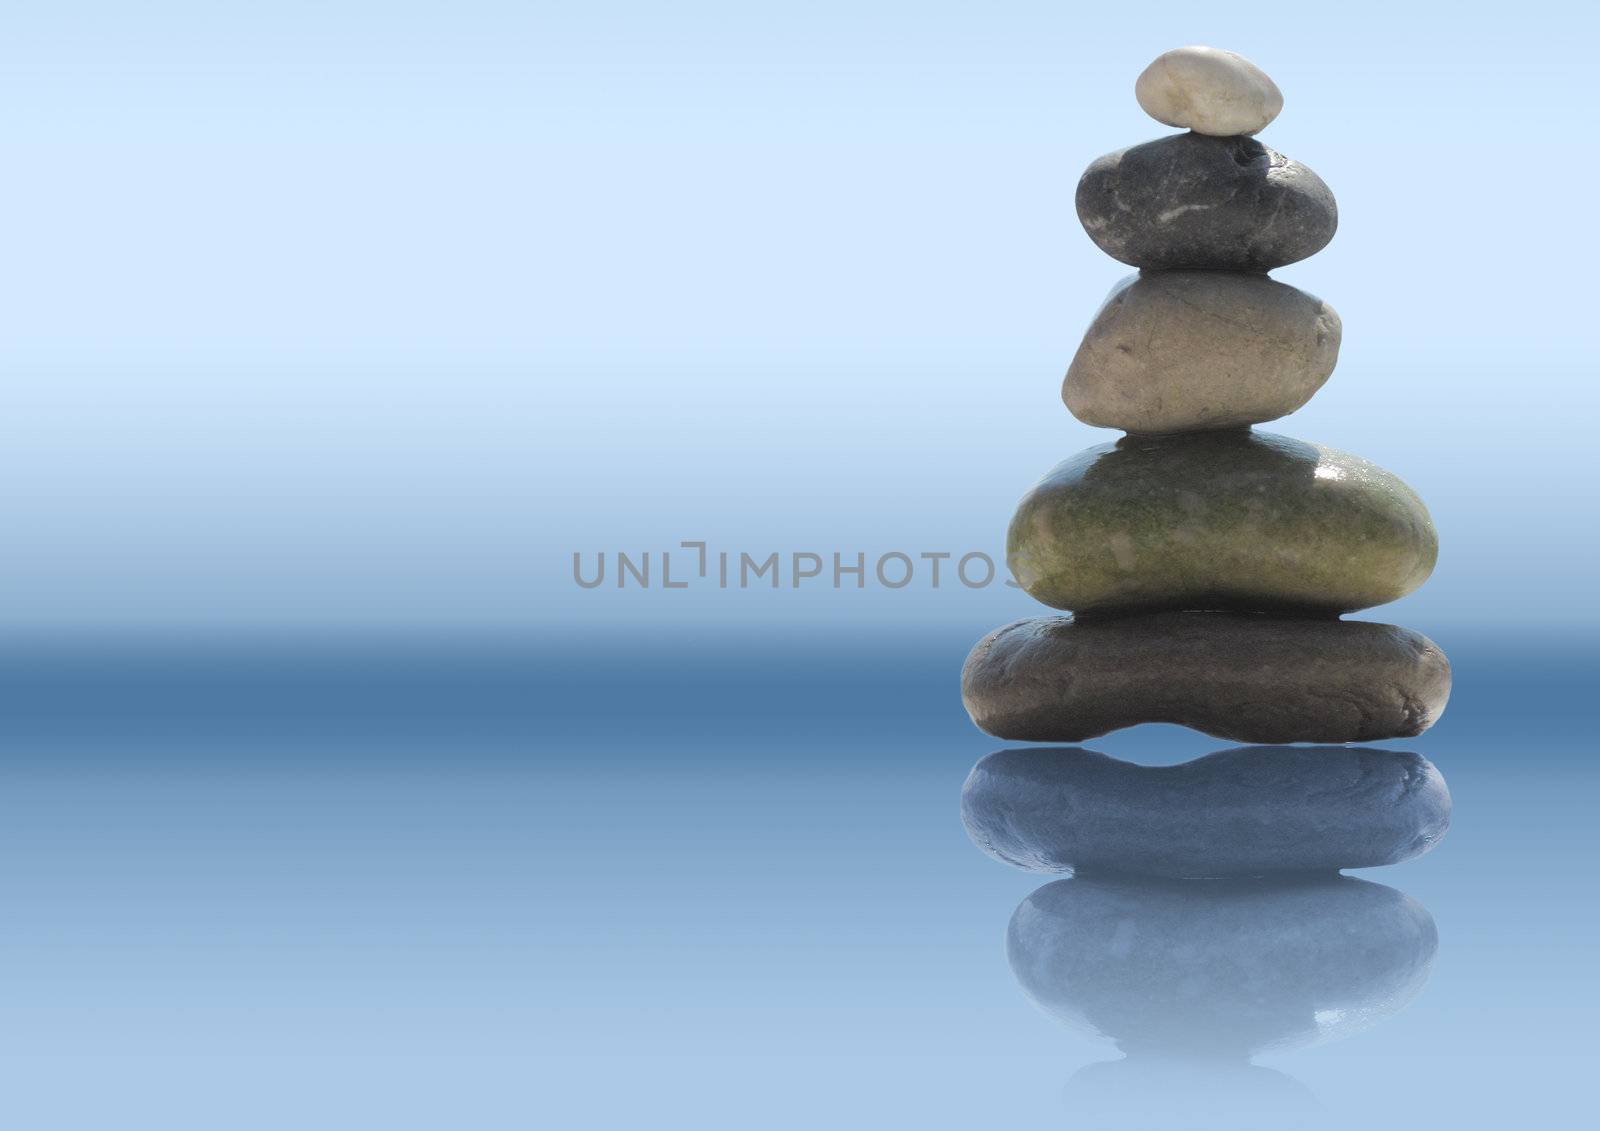 The stack of pebble stones in zen concept  on blue by svtrotof